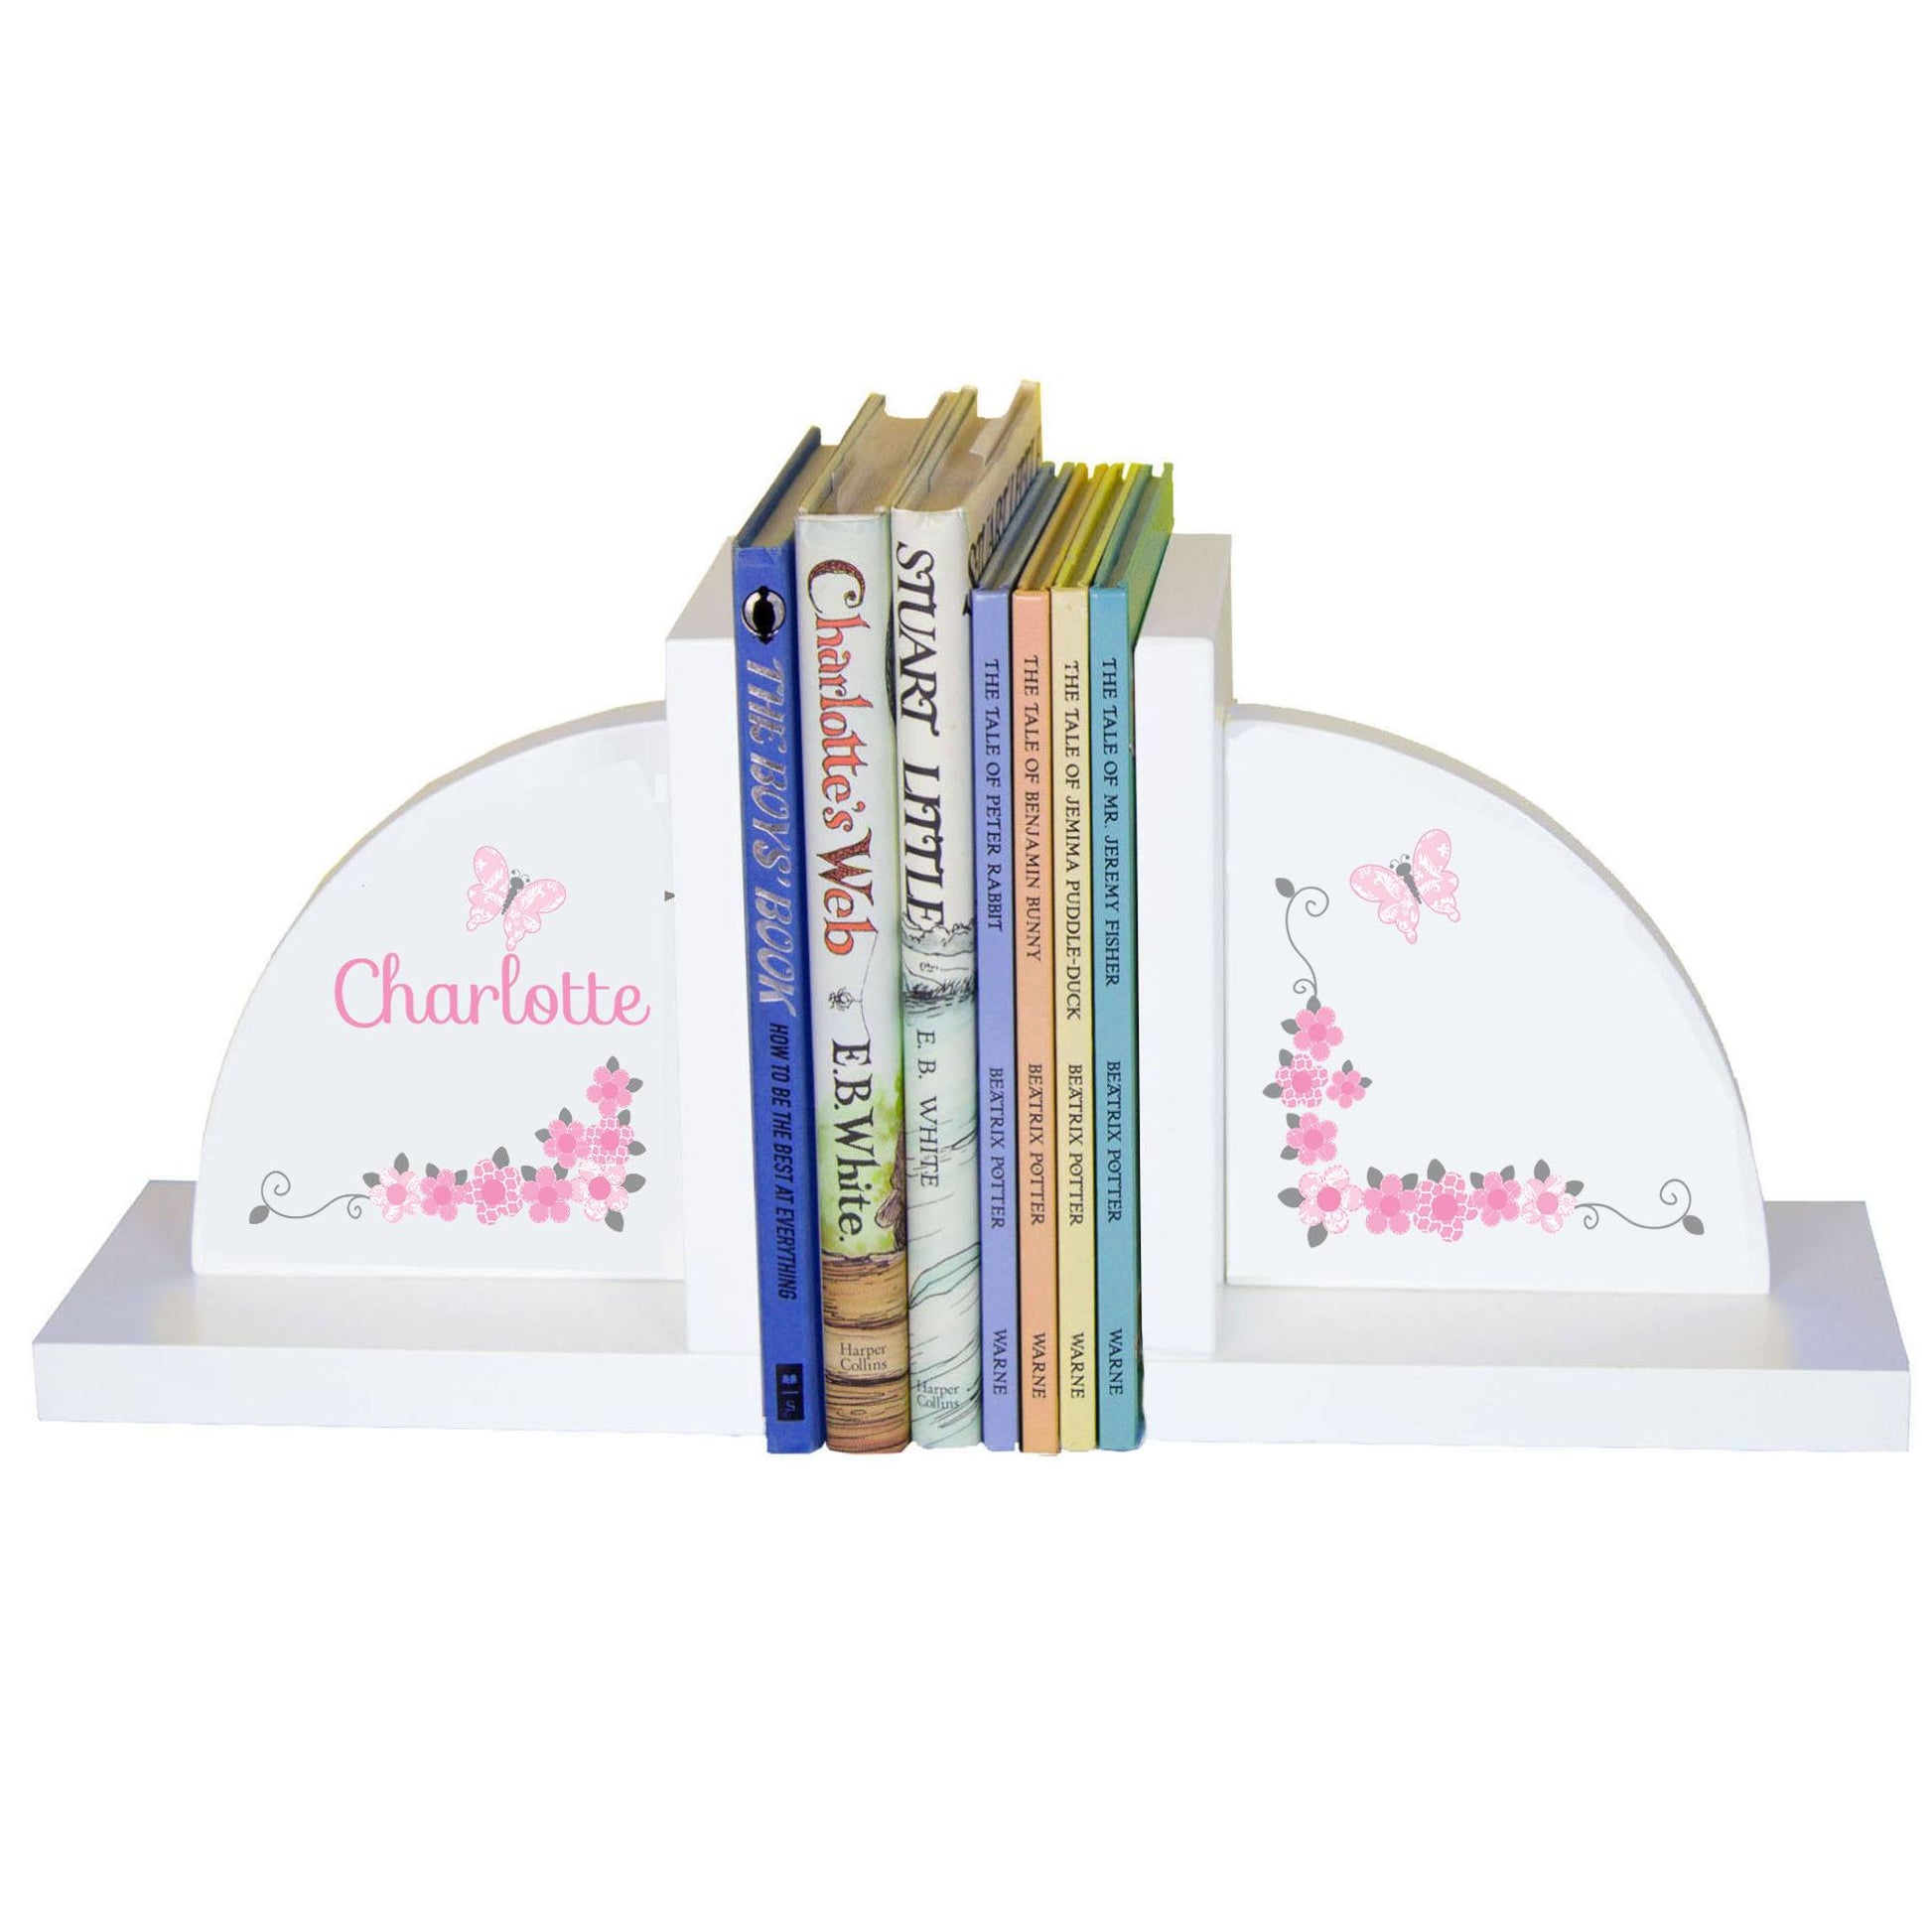 Personalized White Bookends with Pink and Gray Butterflies design